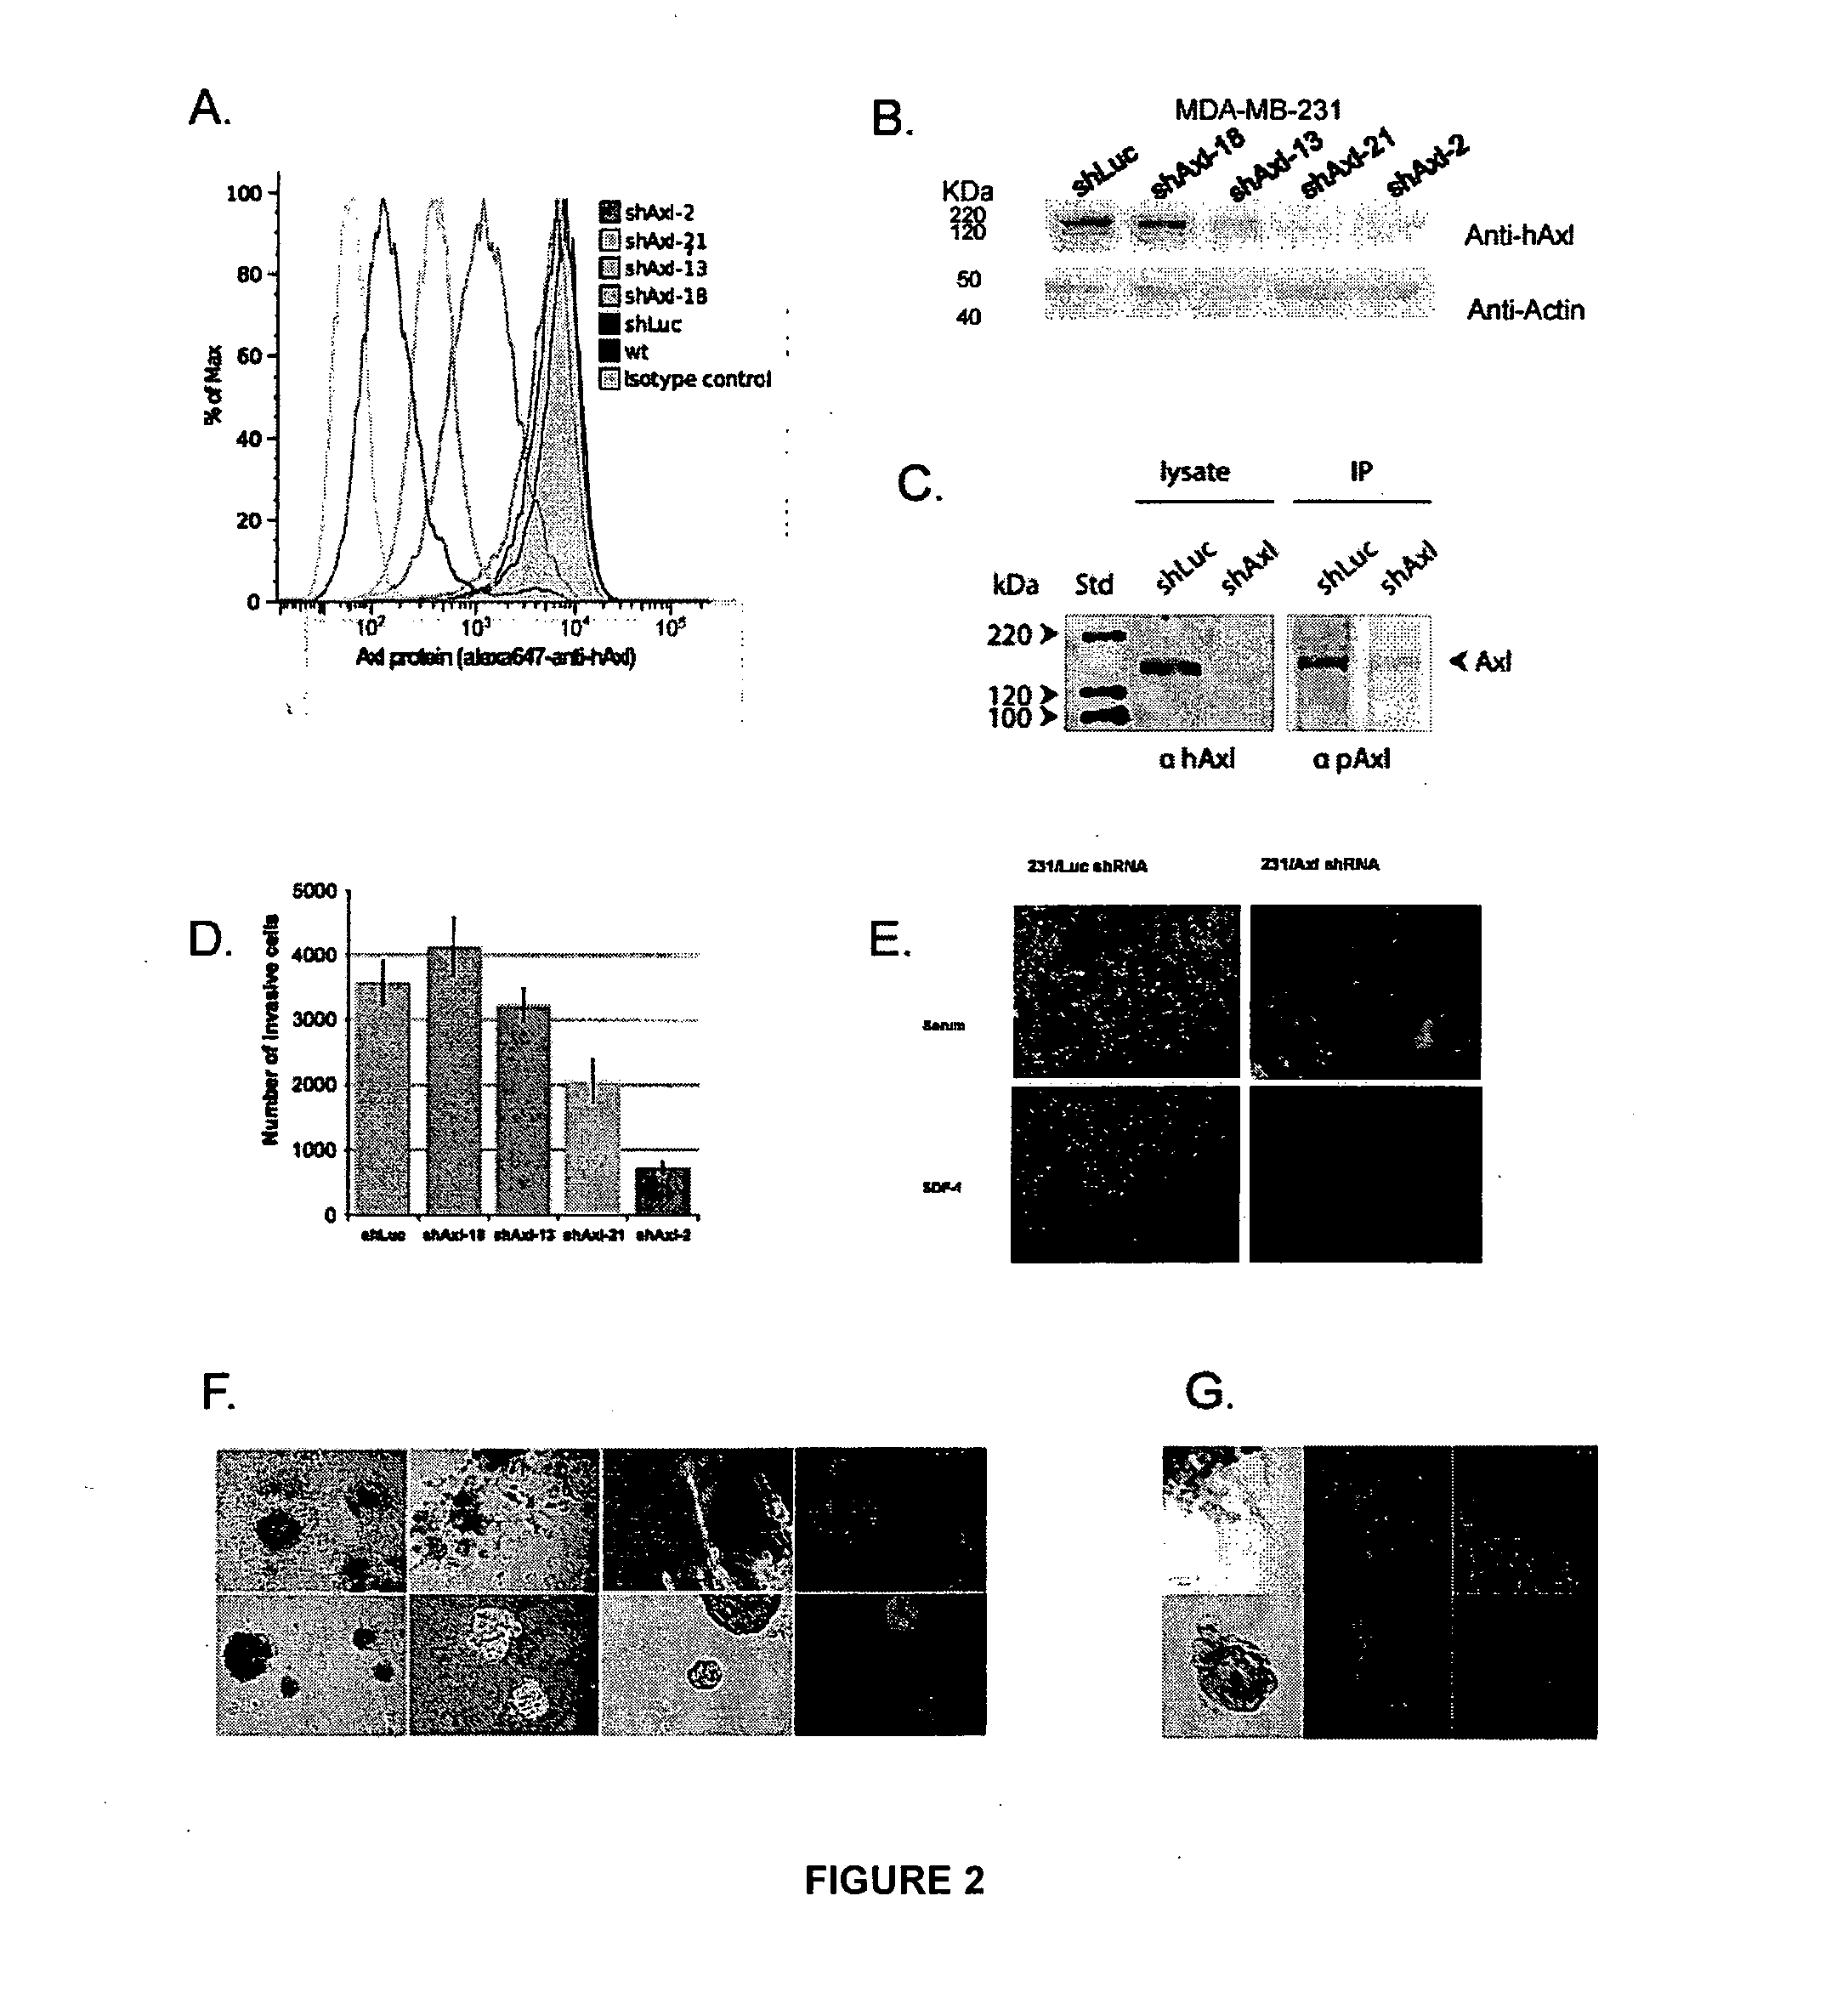 Methods using axl as a biomarker of epithelial-to-mesenchymal transition